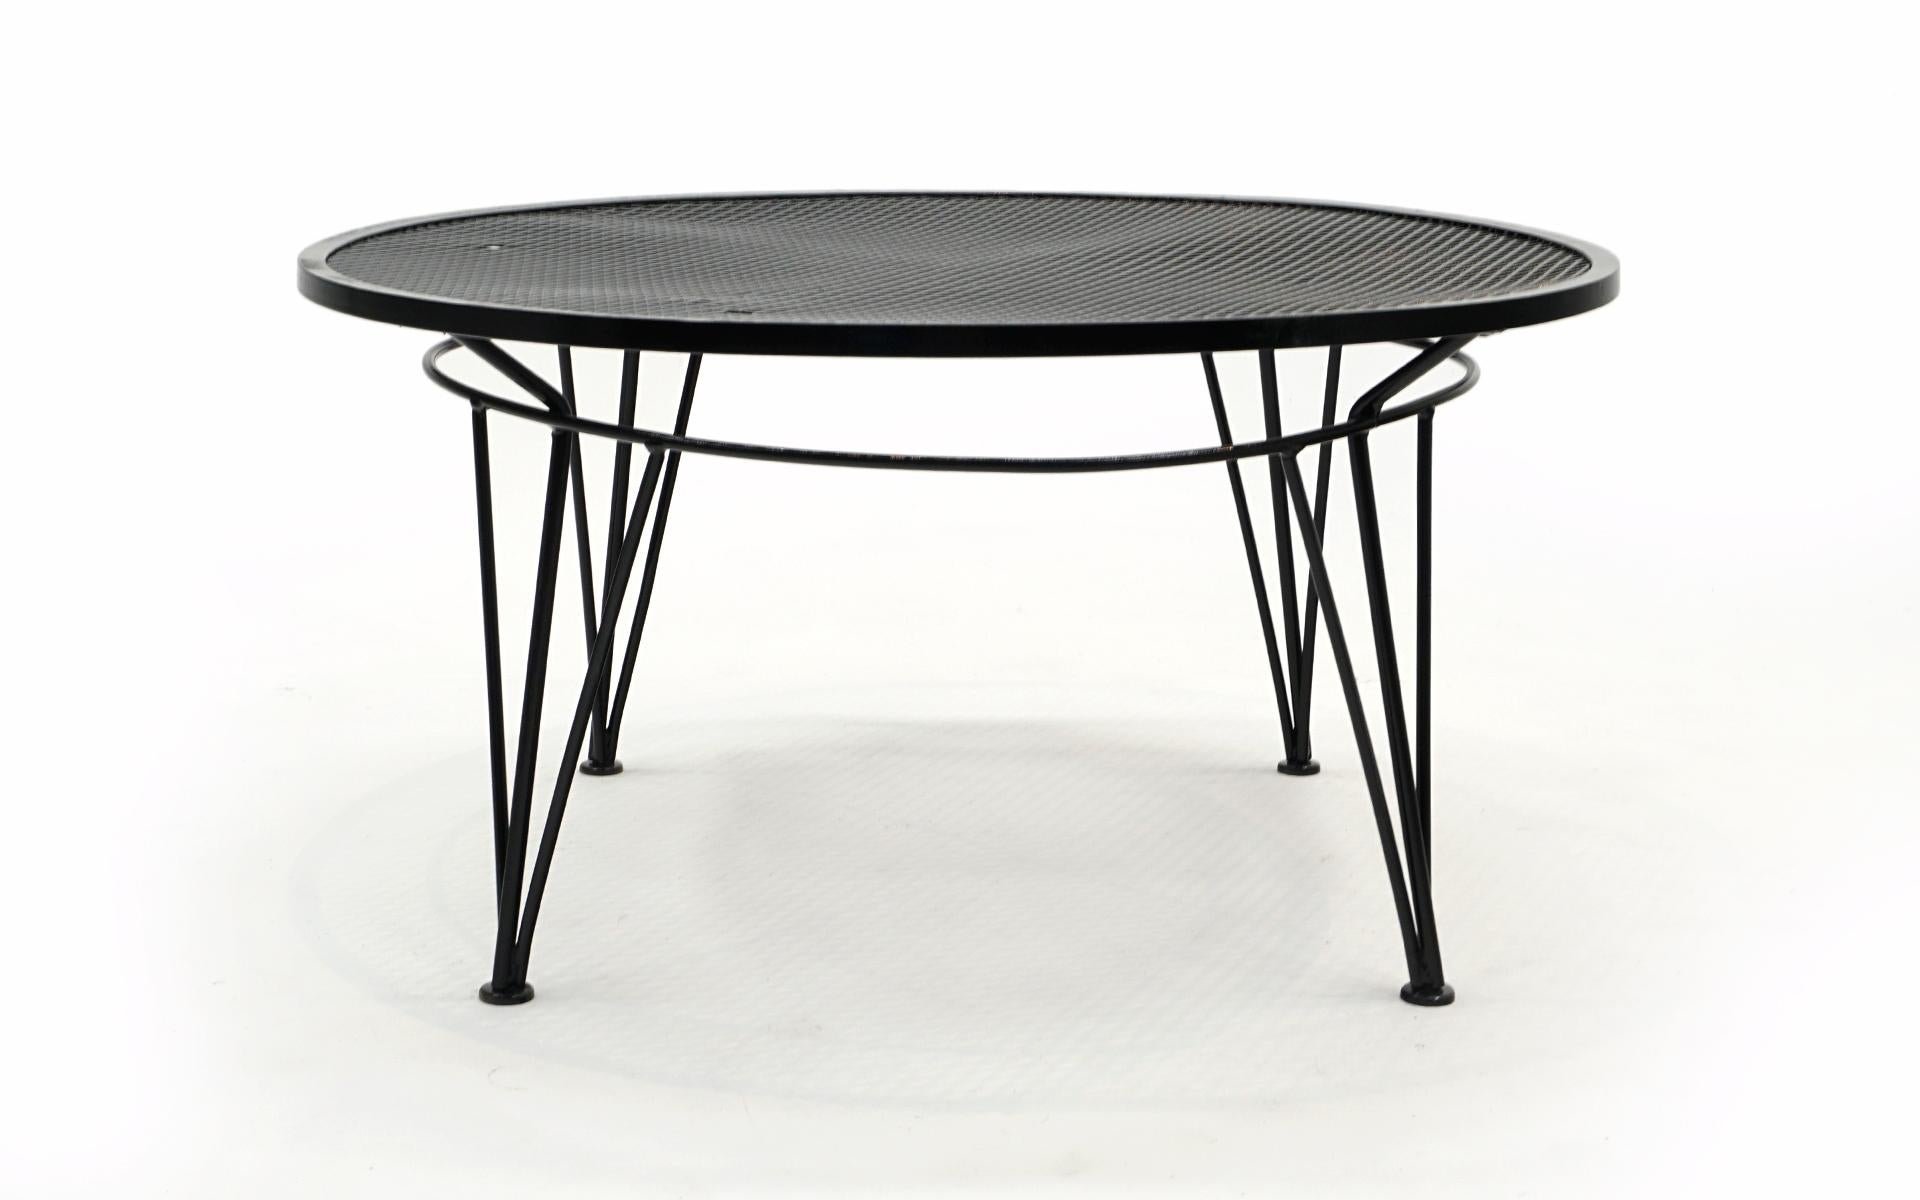 Round John Salterini outdoor / patio / pool / deck coffee table.  Professionally sand blasted and finished in a black gloss automotive paint.  More durable and long lasting than powder coating.  Some areas of slight unevenness to the top which is